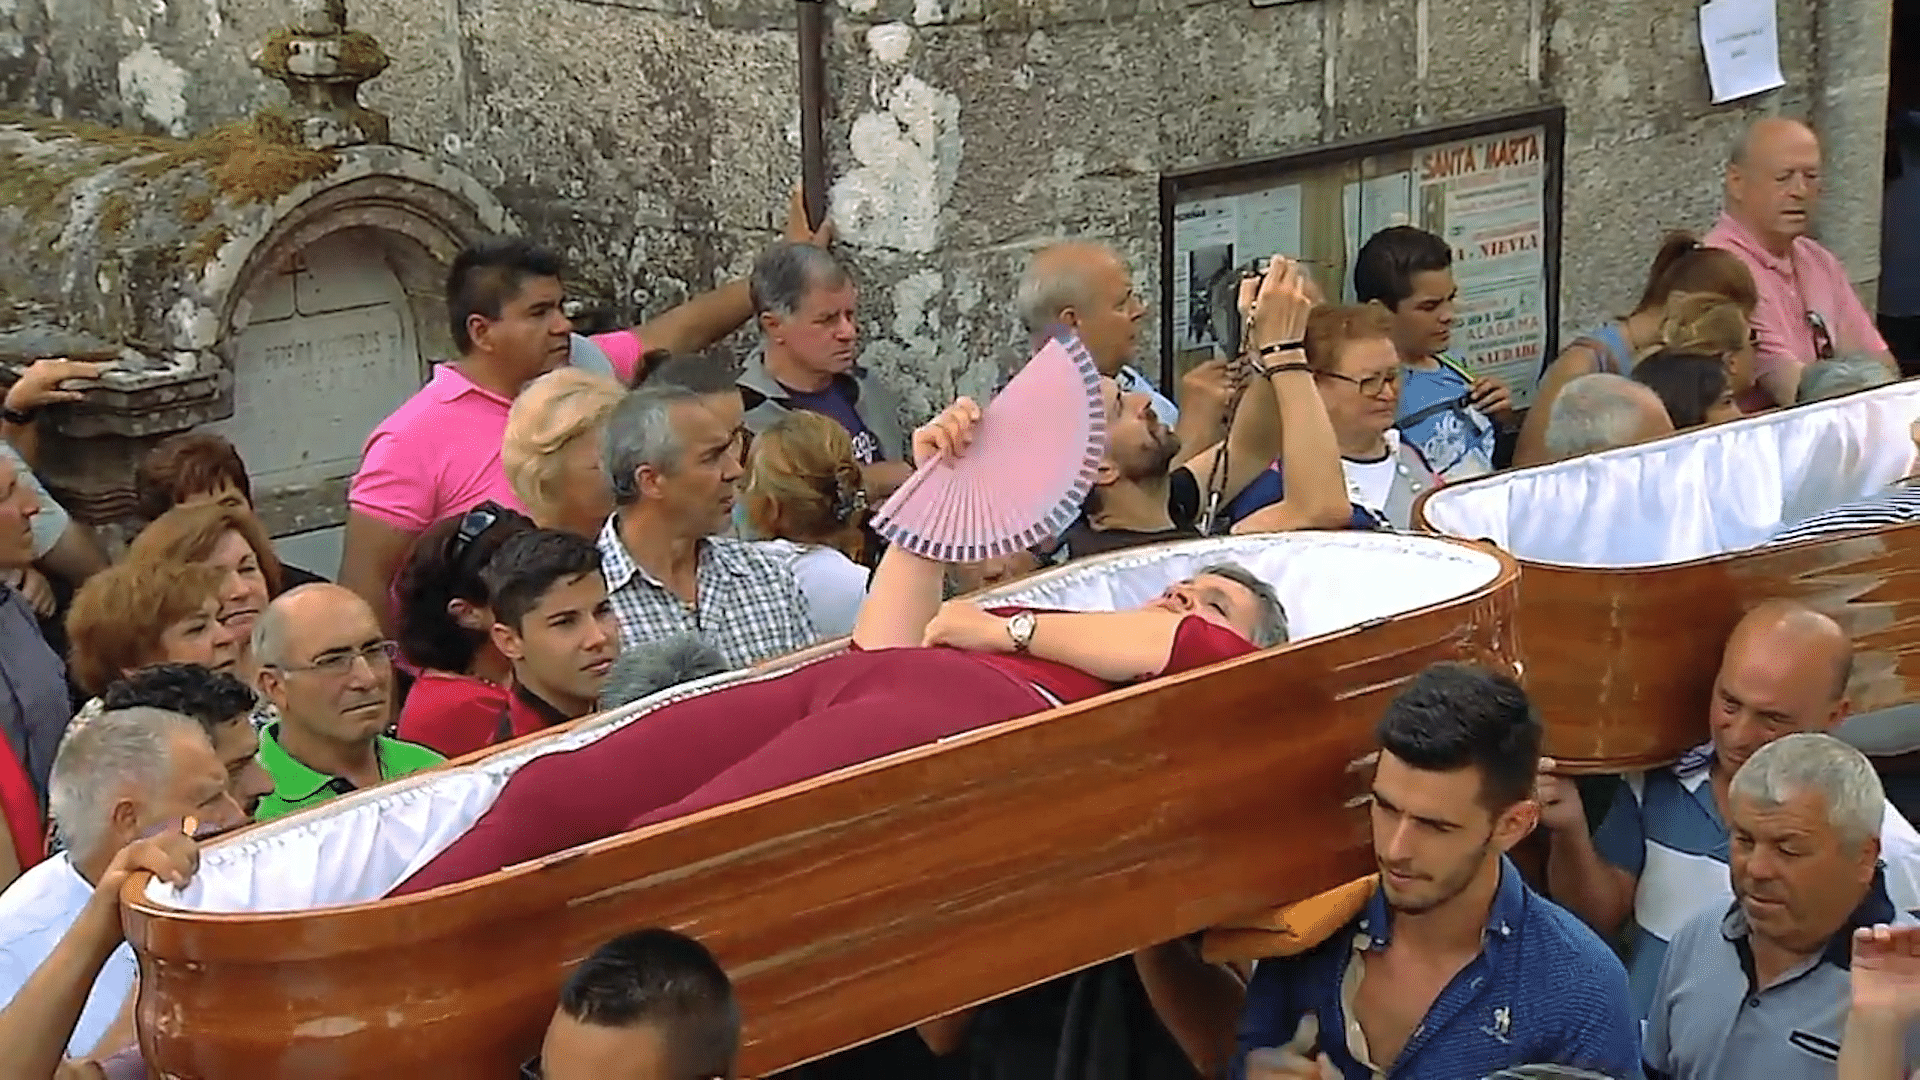 Living people carried in coffins during the Santa Marta pilgrimage